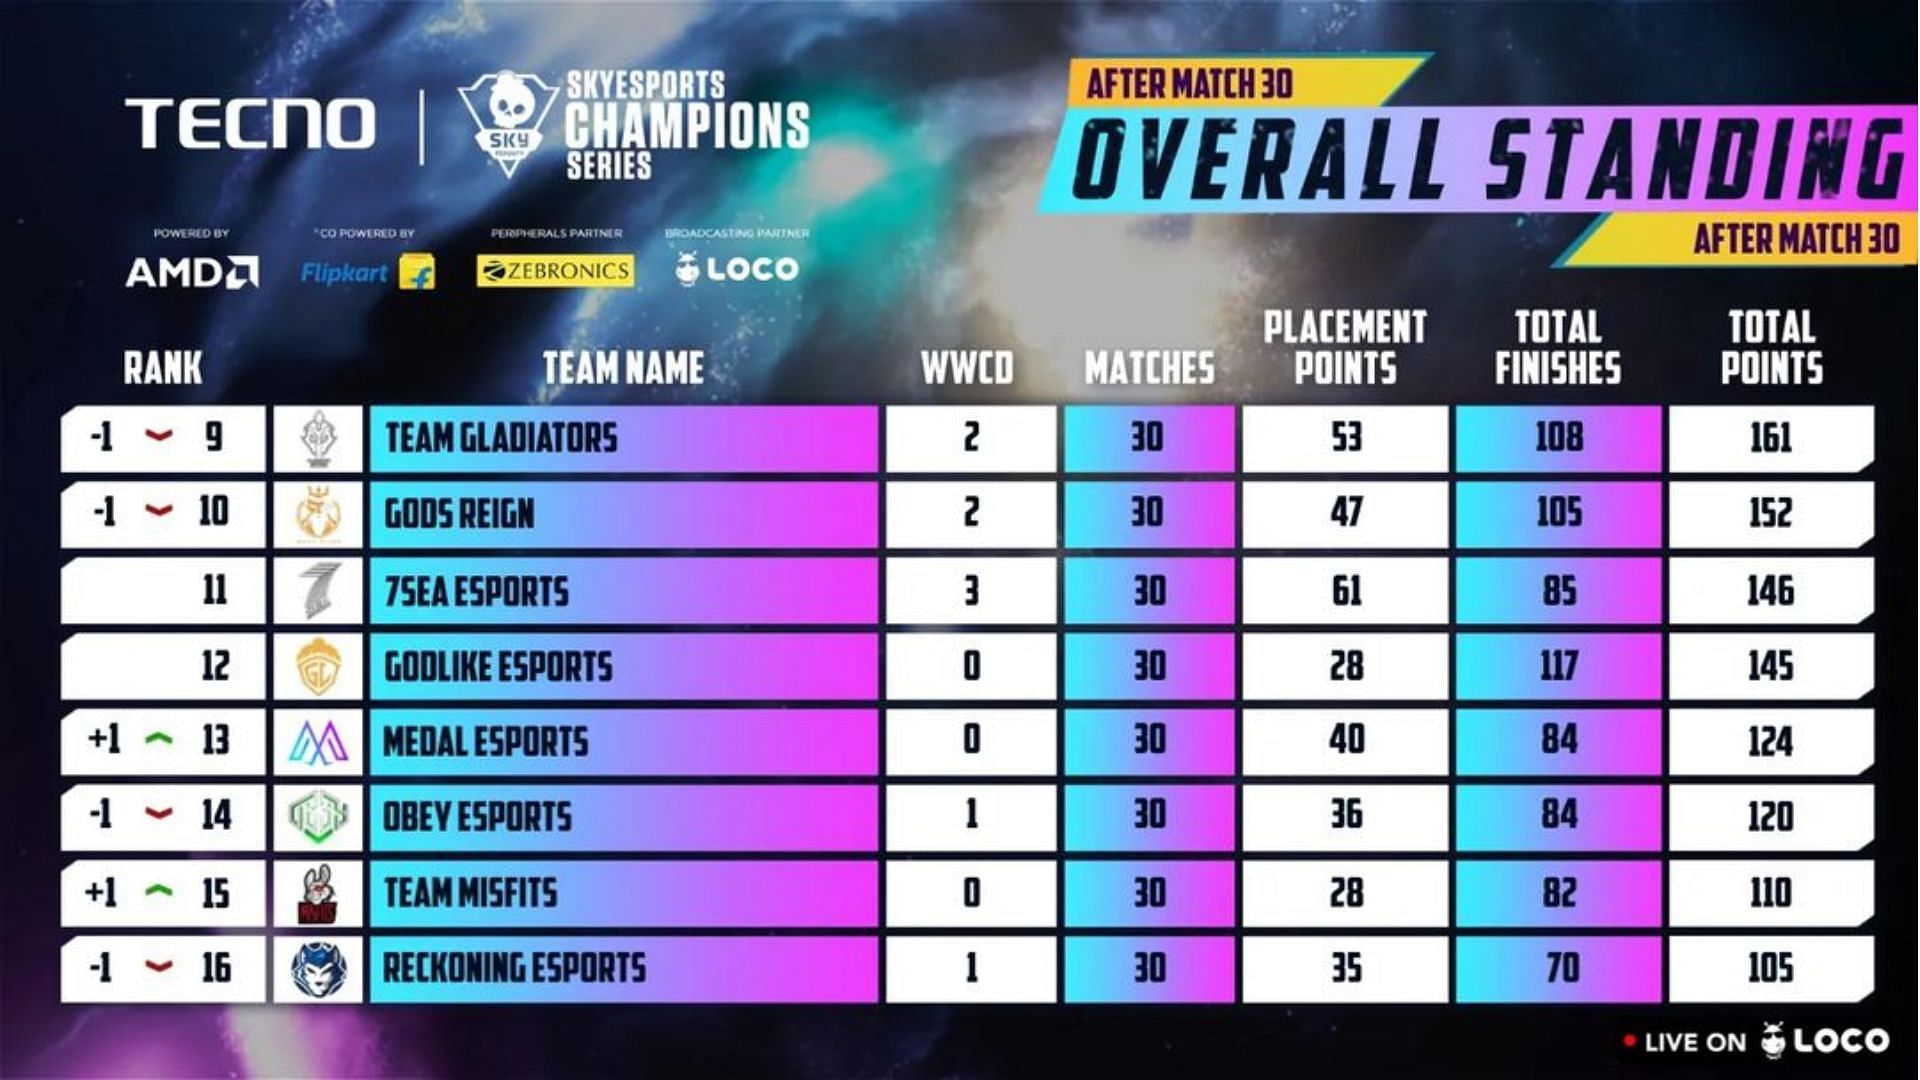 Overall scoreboard of Champions Series Finals (Image via Skyesports)